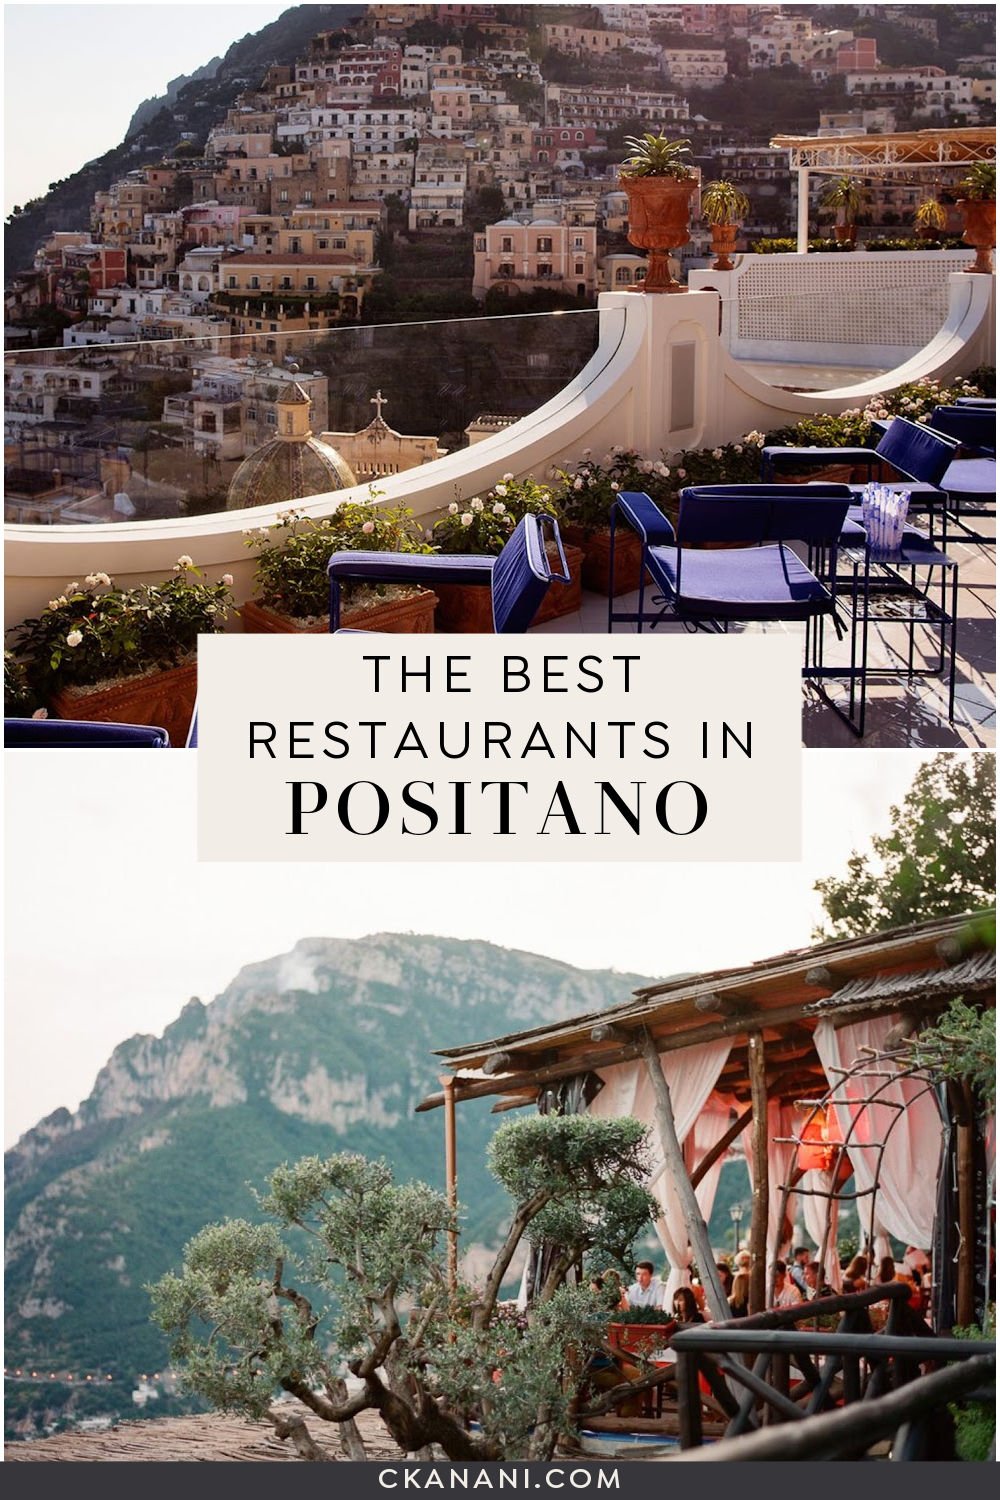 A guide to the best restaurants in Positano Italy. What to do in Positano, Positano things to do, Positano itinerary, Positano travel guide, Amalfi Coast restaurants, where to eat in Positano